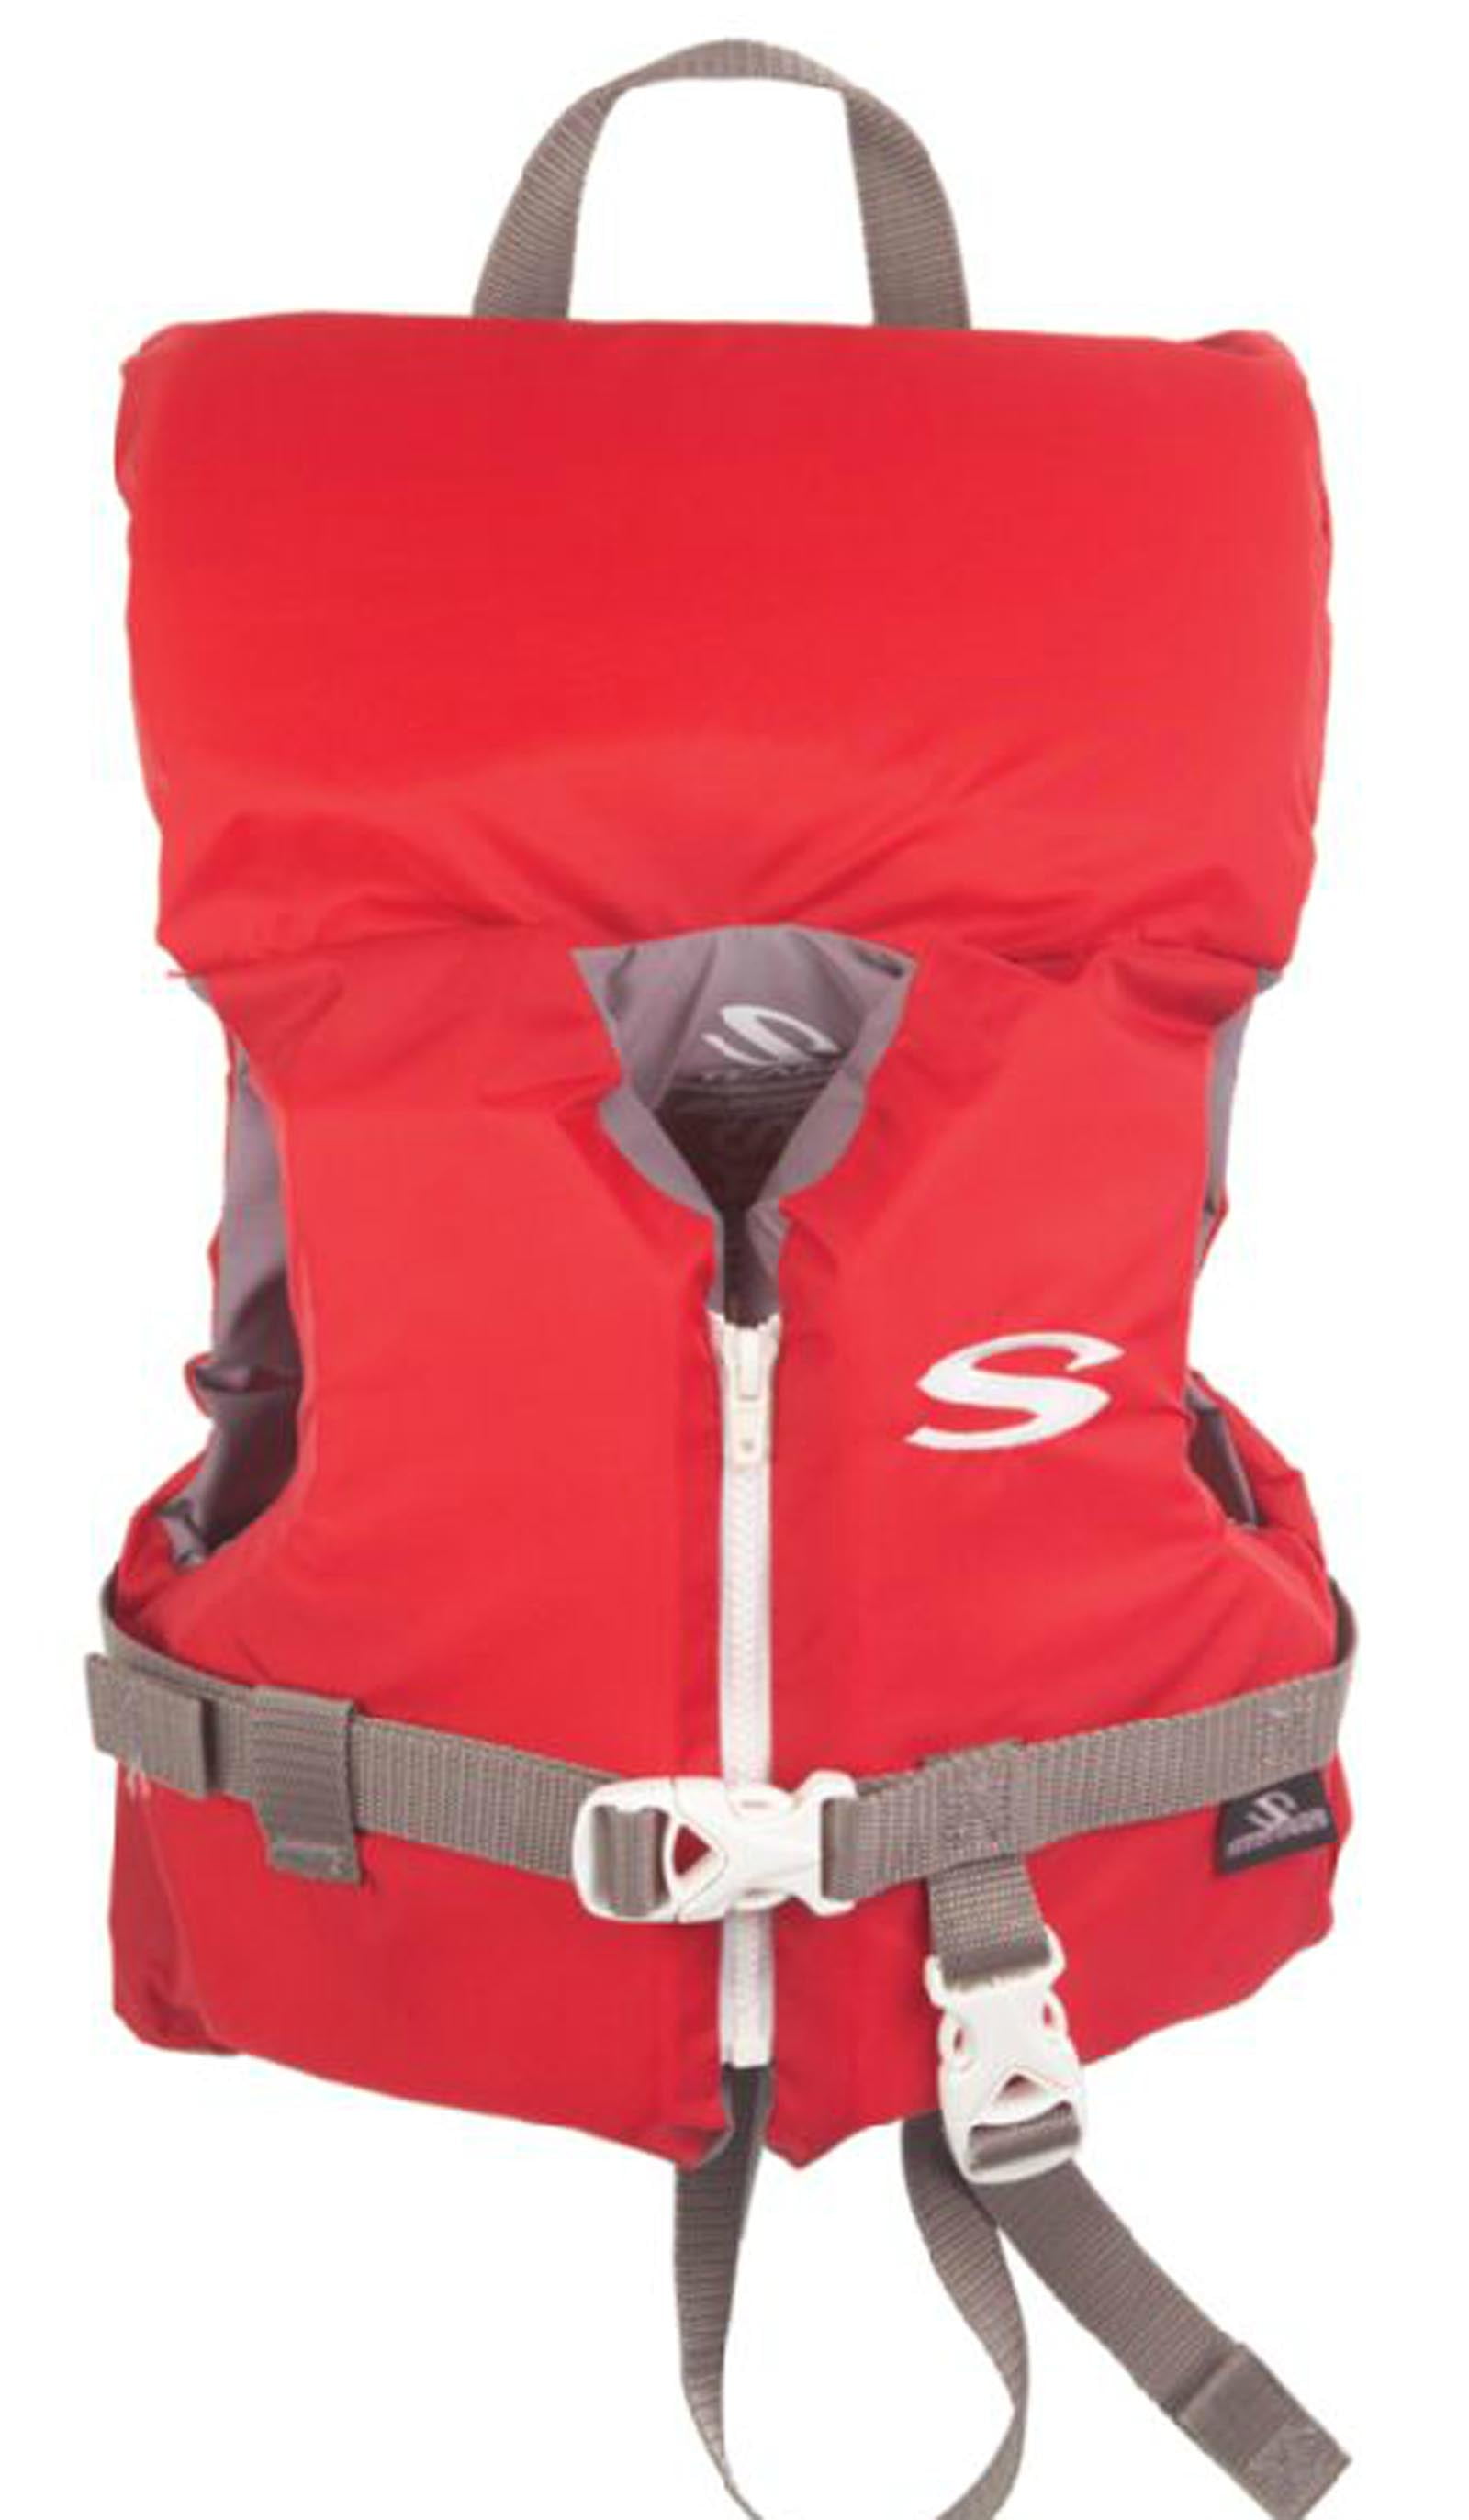 50-90 lbs for sale online COLEMAN Stearns Classic Series Youth Red Life Jacket Flotation Vest 